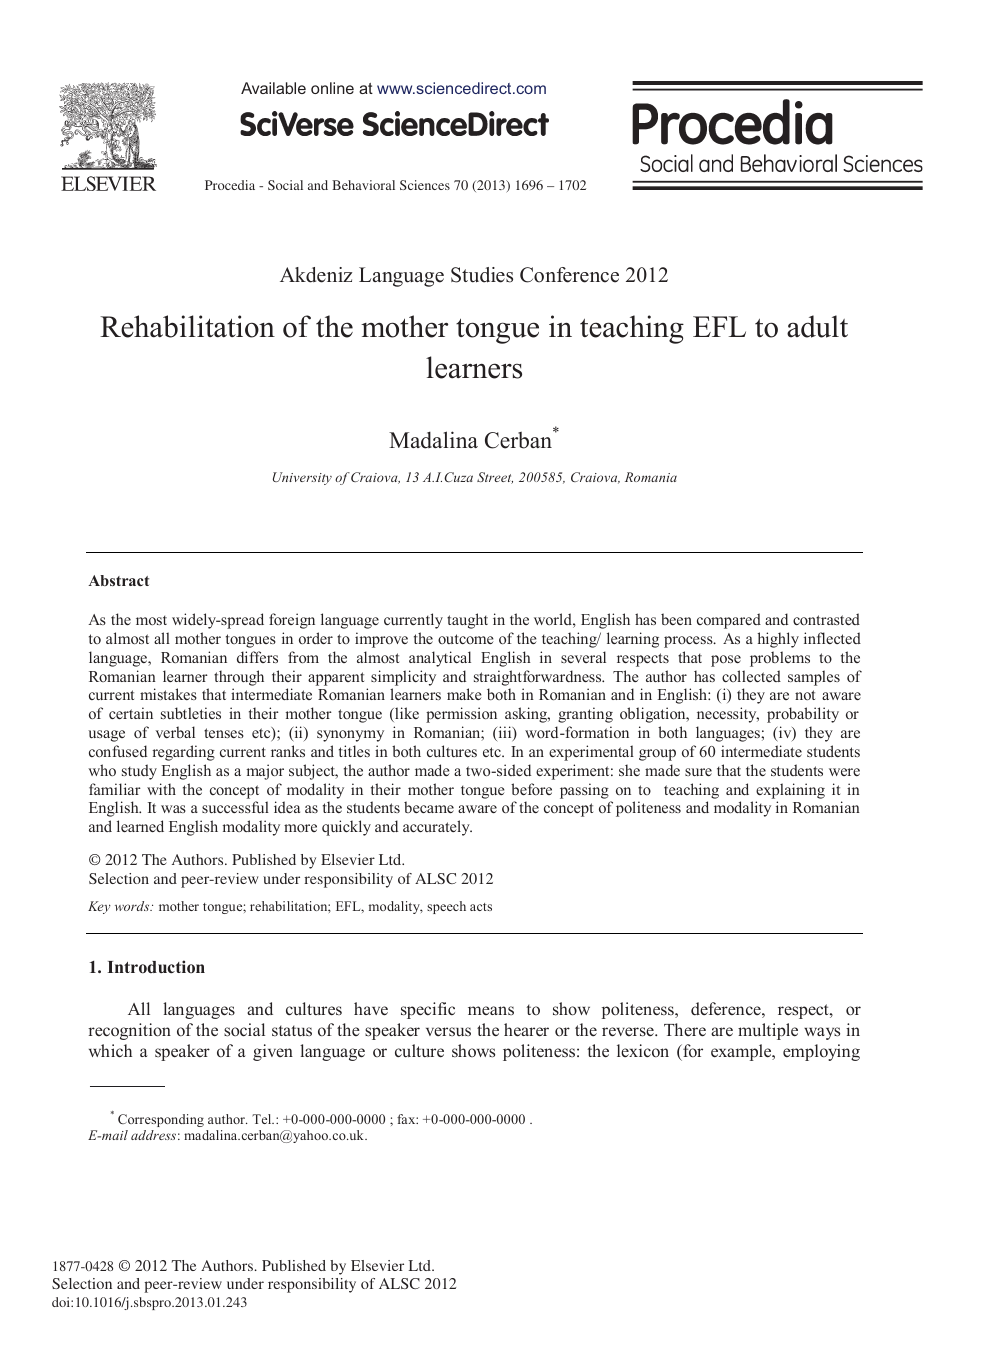 Rehabilitation Of The Mother Tongue In Teaching Efl To Adult